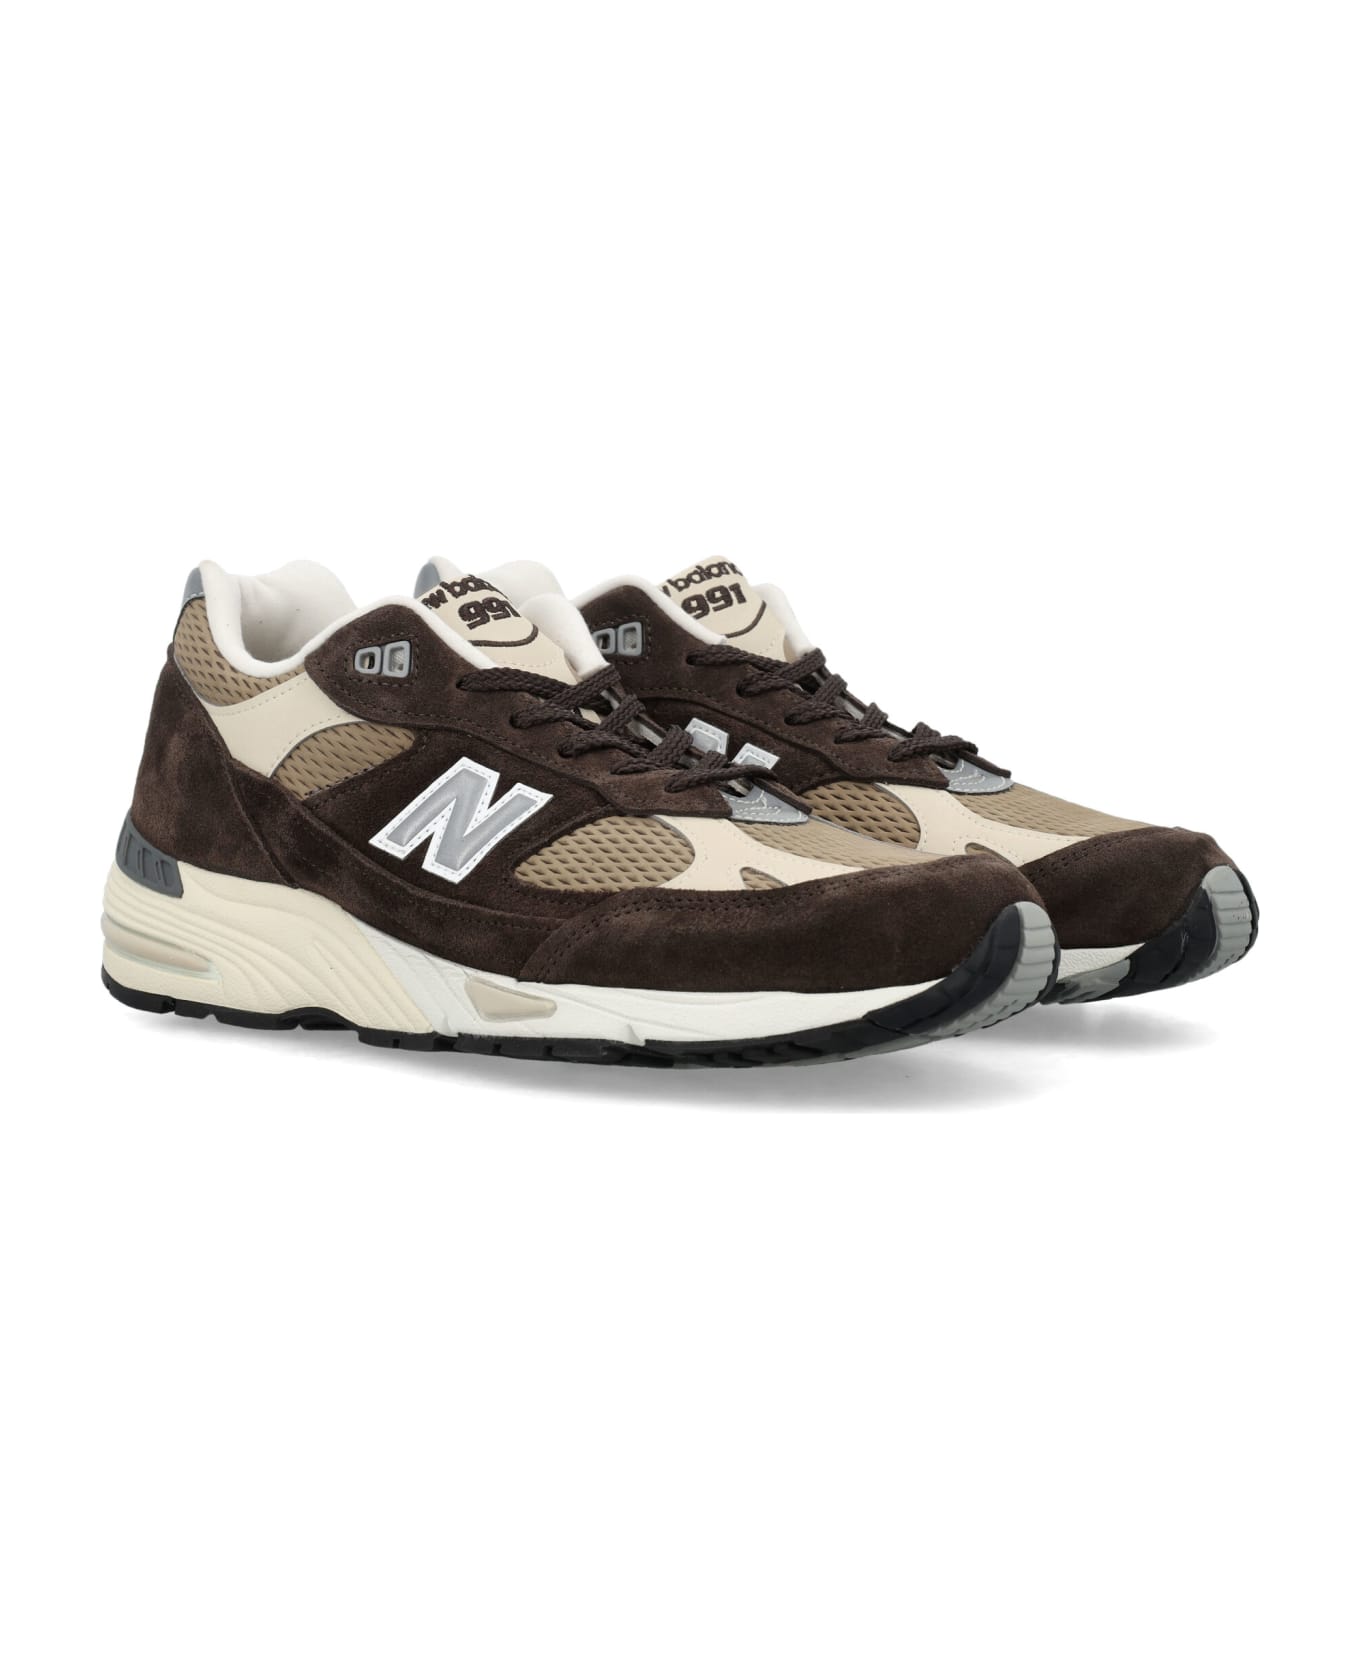 New Balance Made In Uk 991 V1 Finale - BROWN